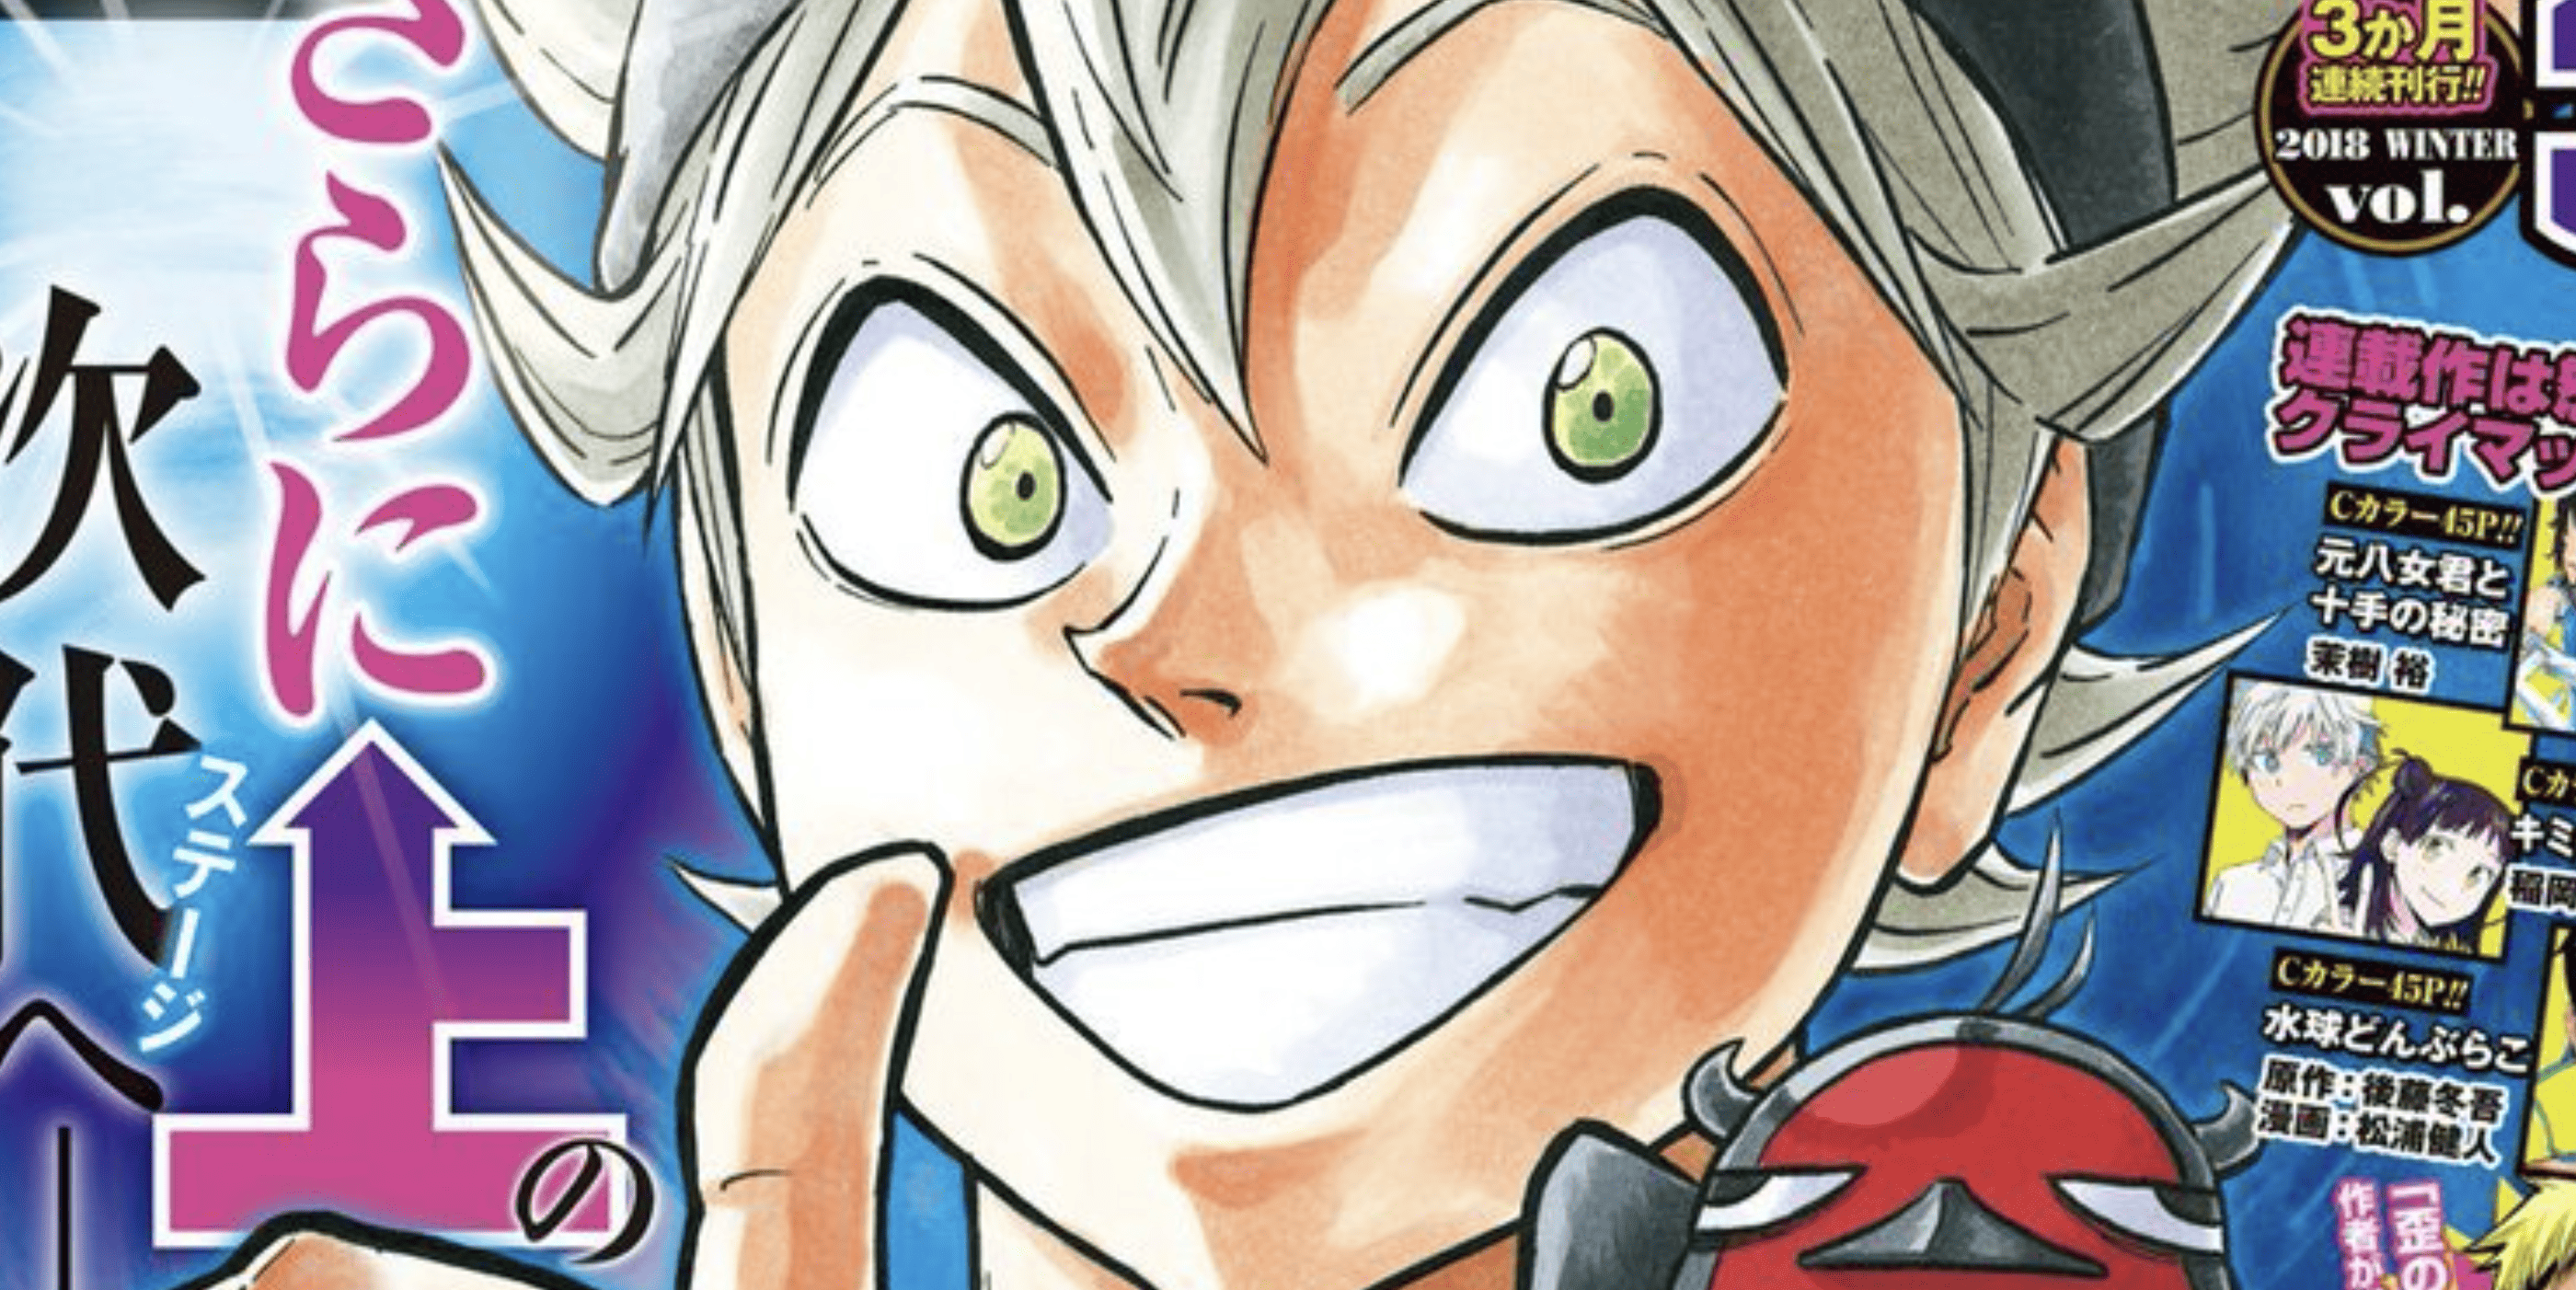 Black Clover Fans Express Disappointment Over New Chapter Announcement, Concerned About Series' Future